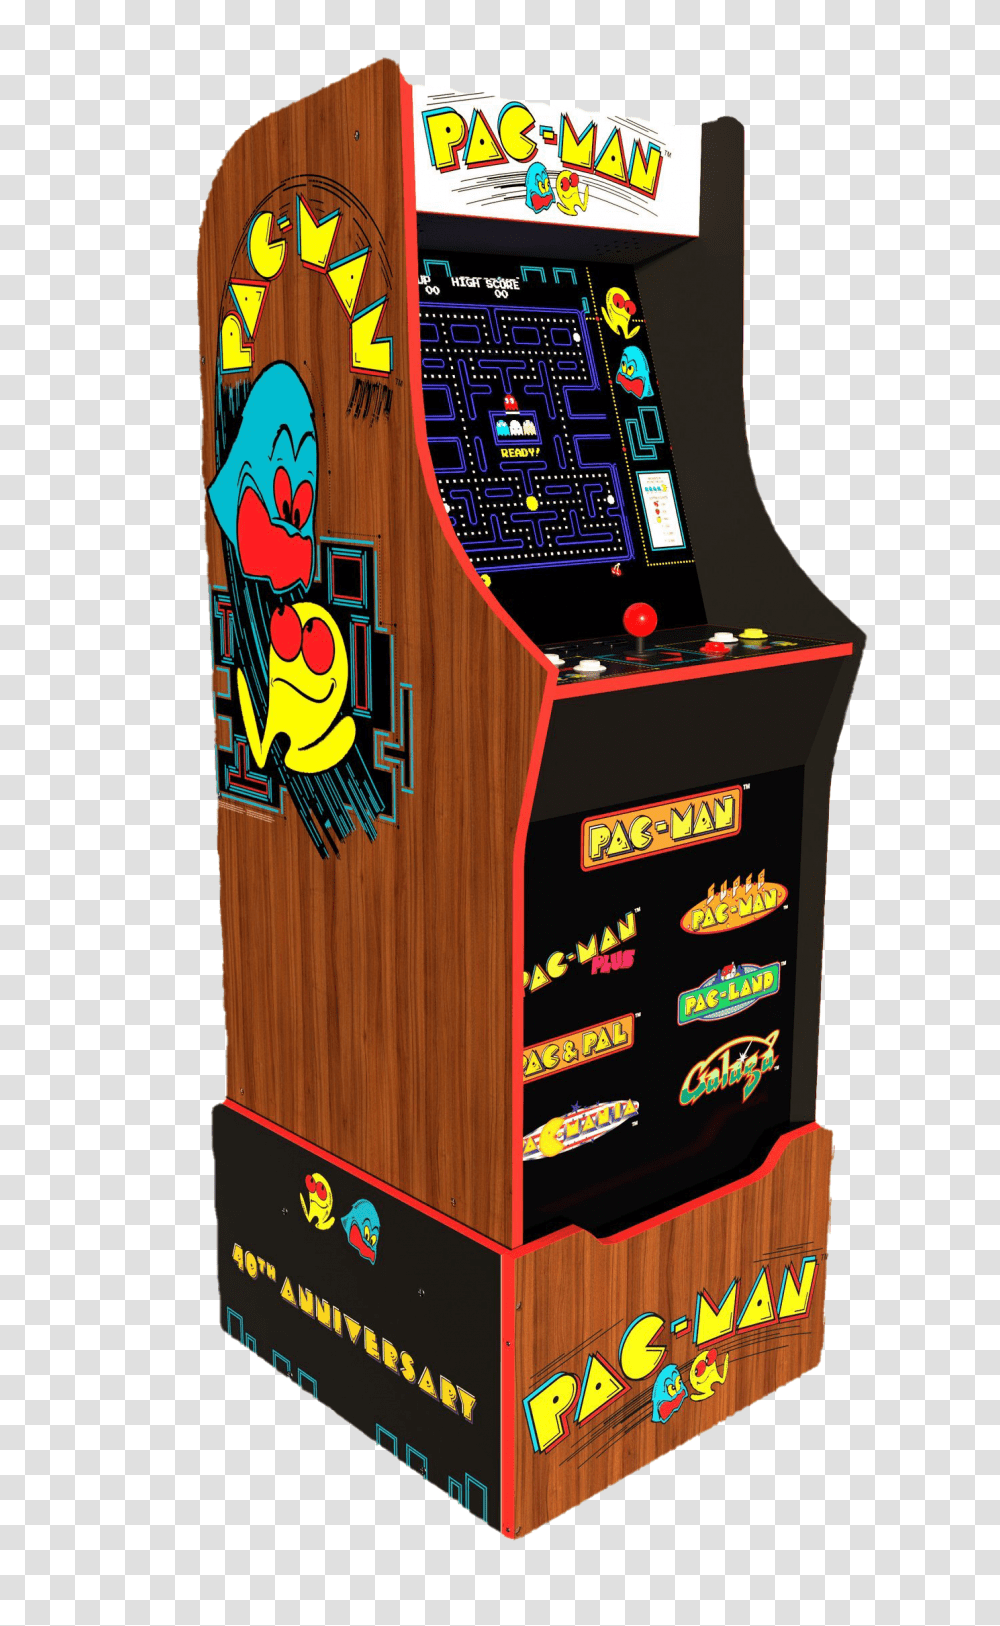 The Star Wars Home Arcade Game Arcade1up Pac Man 40th Anniversary Edition, Arcade Game Machine Transparent Png